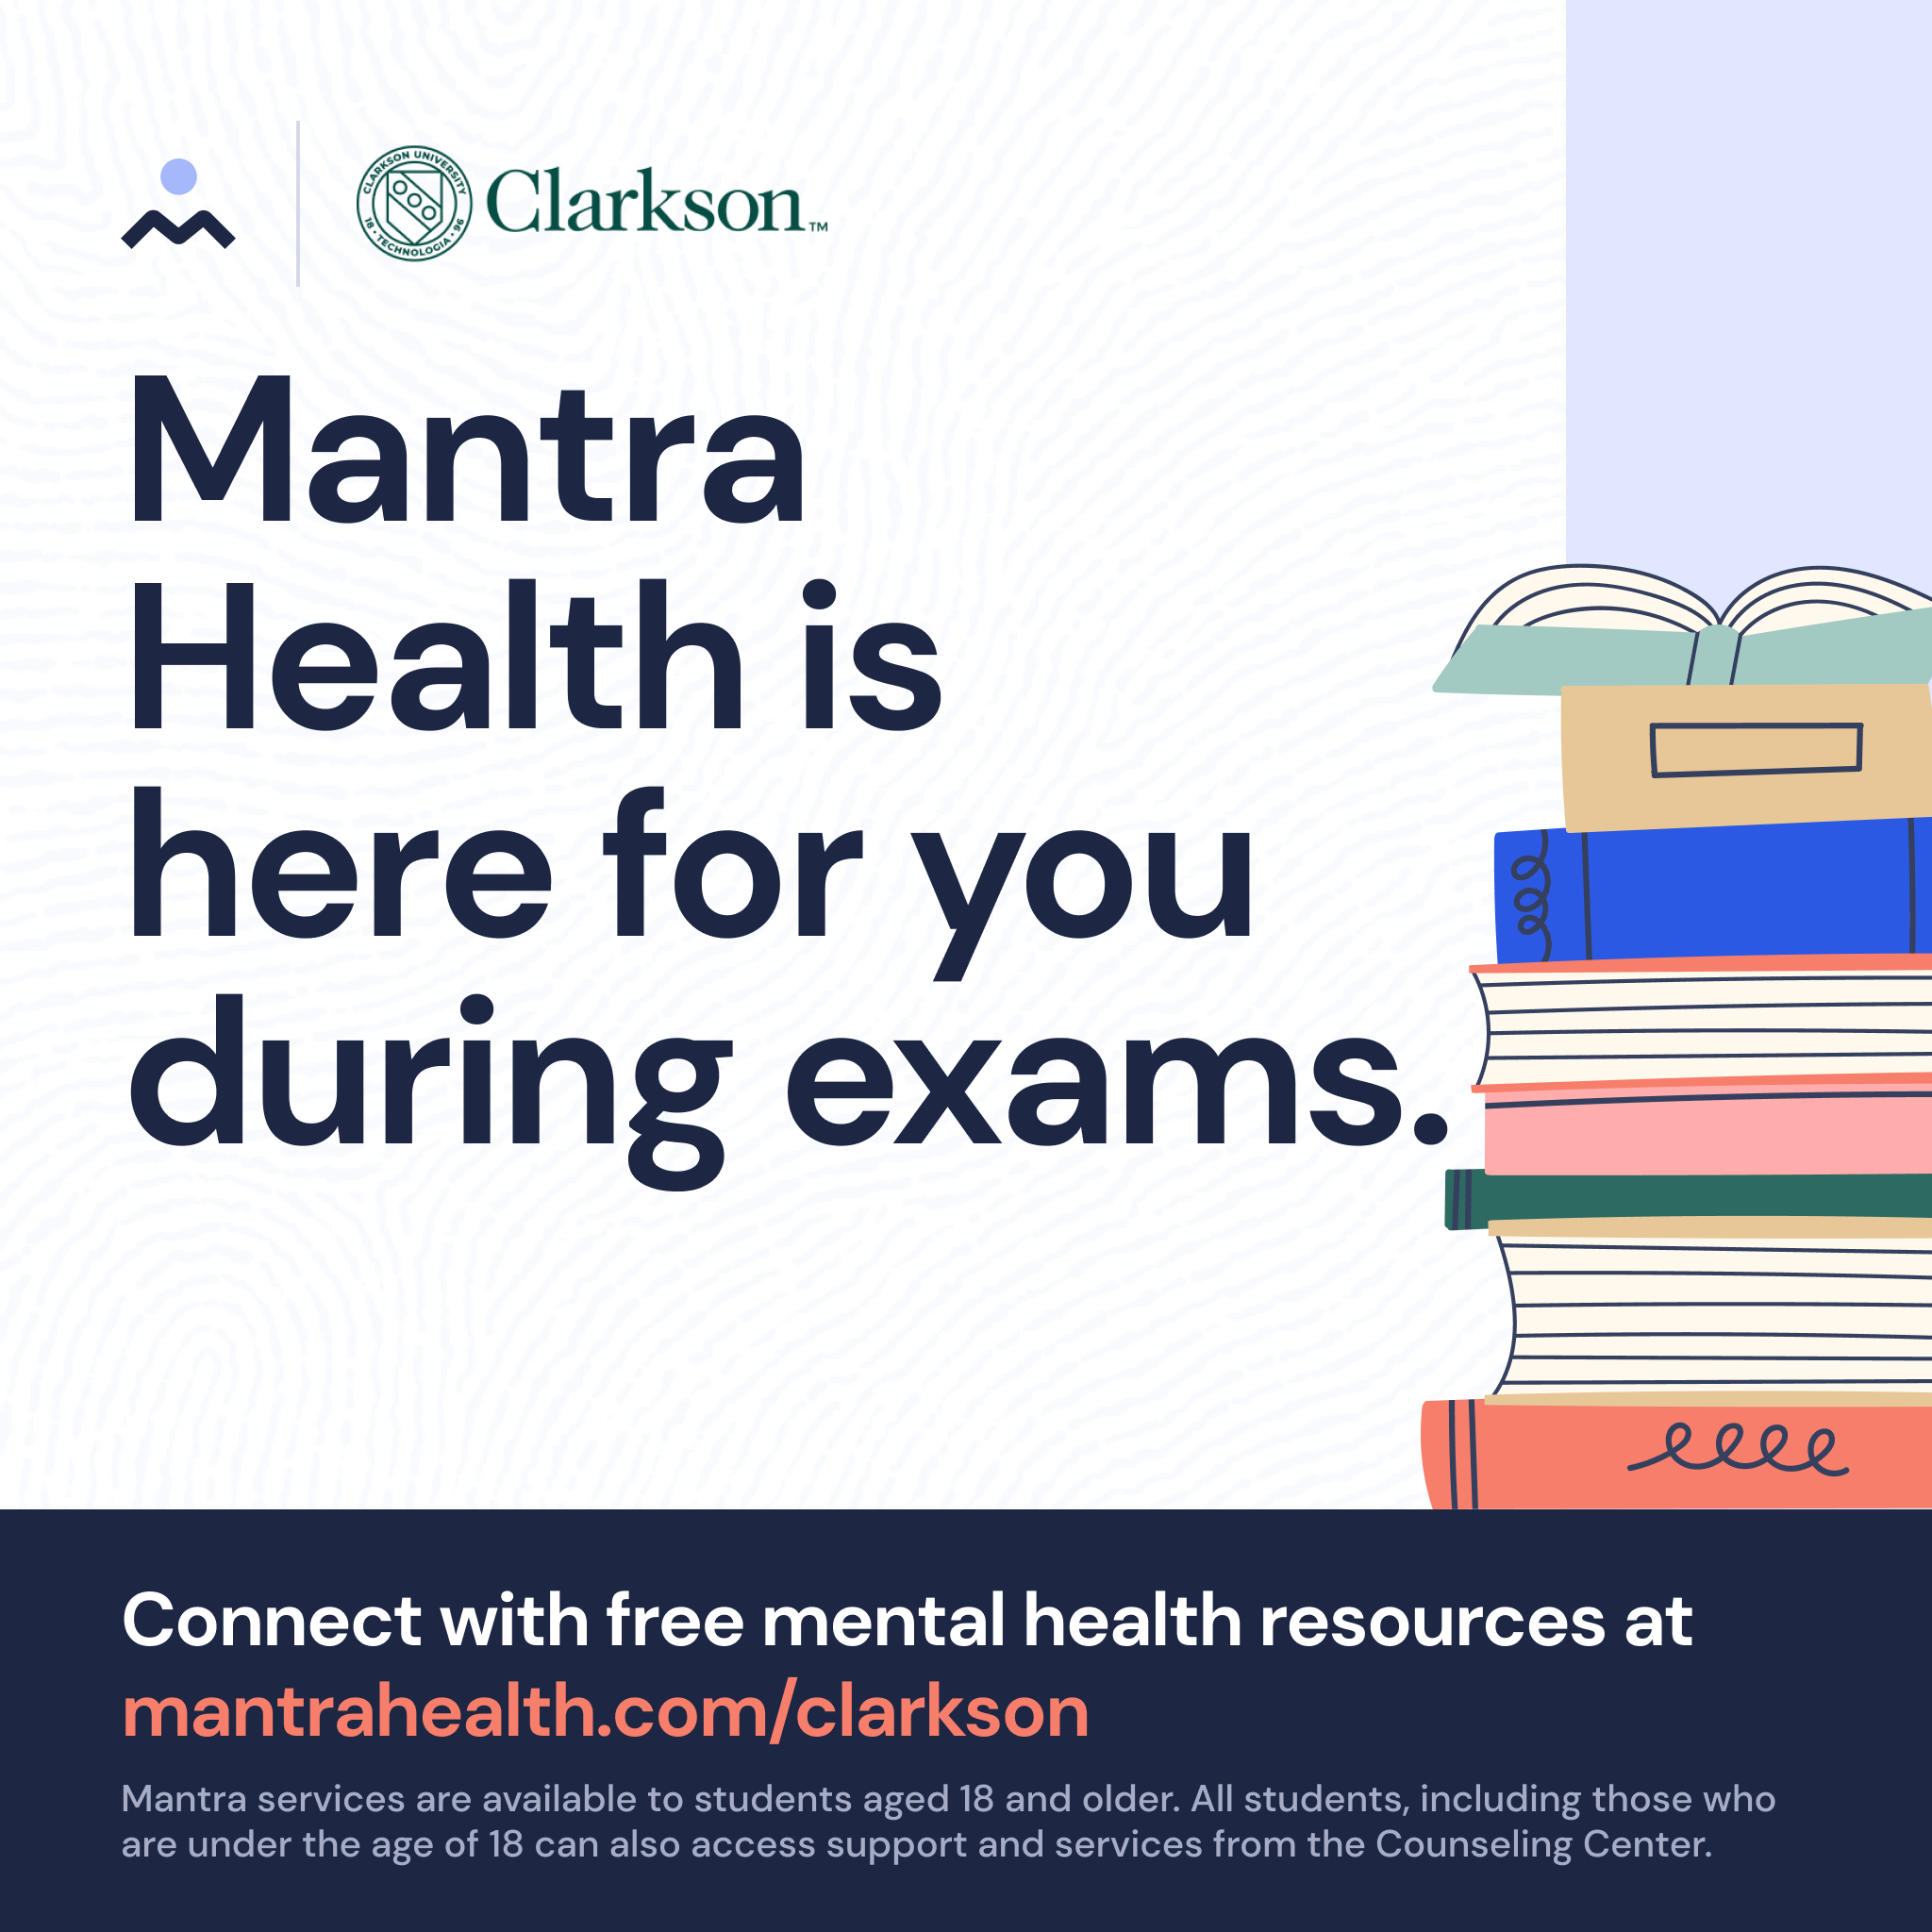 stack of textbooks with the following wording: Mantra Health is here for you during exams. Connect with free mental health resources at mantrahealth.com/clarkson Mantra services are available to students aged 18 and older. All students, including those who are under the age of 18 can also access support and services from the Counseling Center.